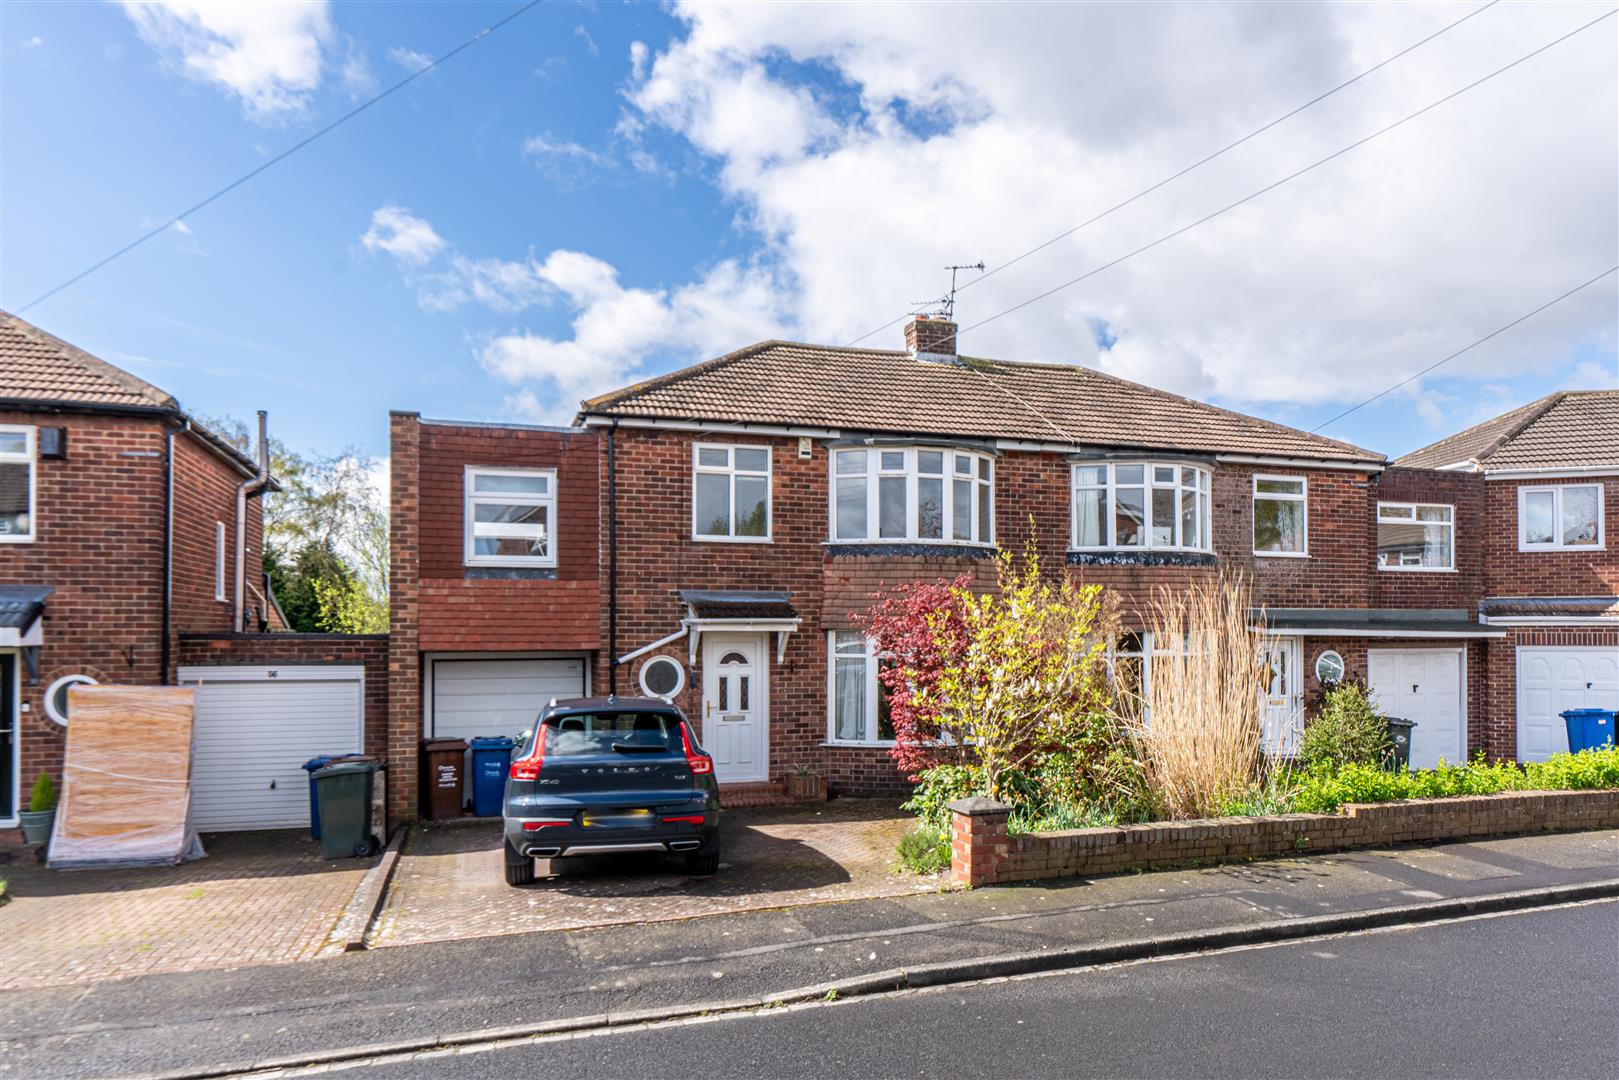 3 bed semi-detached house to rent in Clayworth Road, Gosforth - Property Image 1